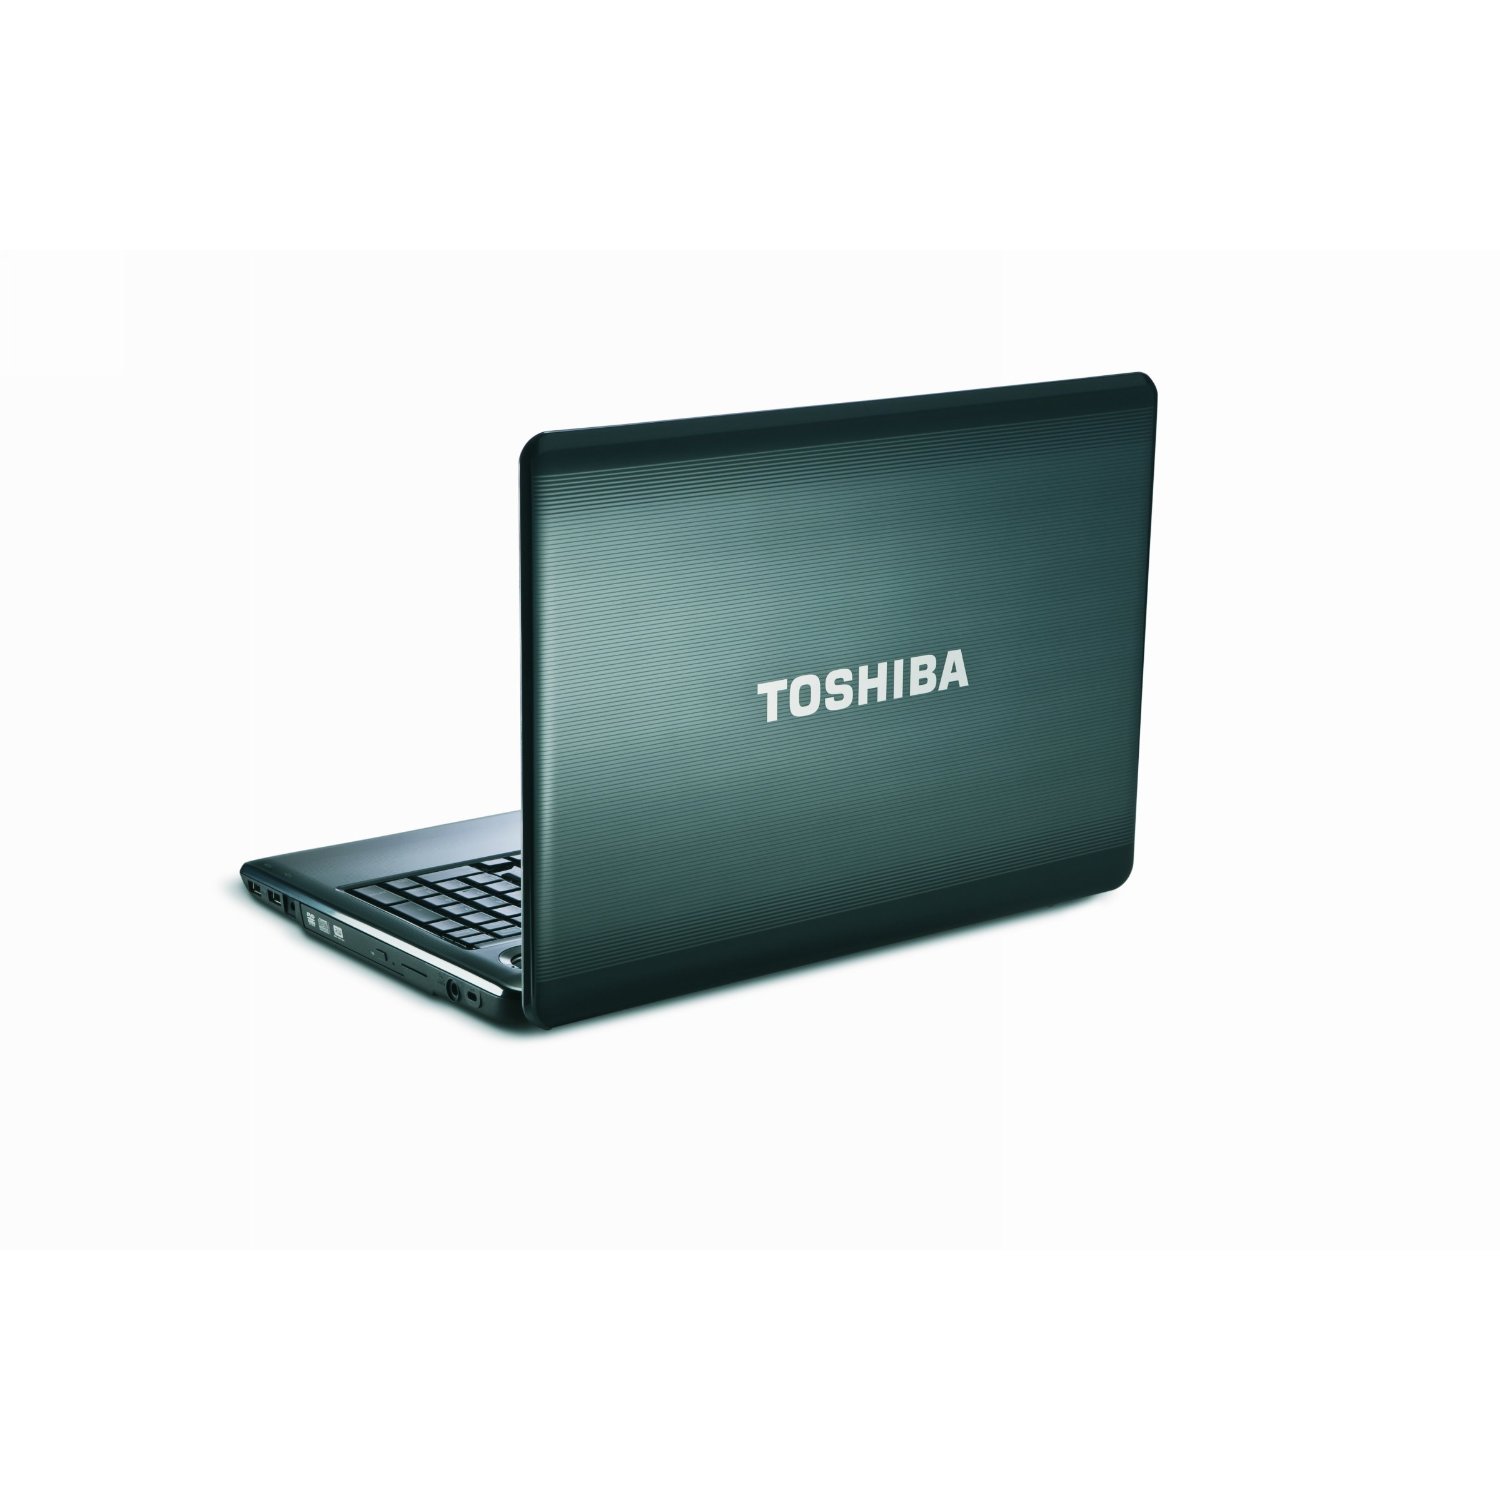 http://thetechjournal.com/wp-content/uploads/images/1111/1320148584-toshiba-satellite-p305s8915-170inch-laptop-7.jpg